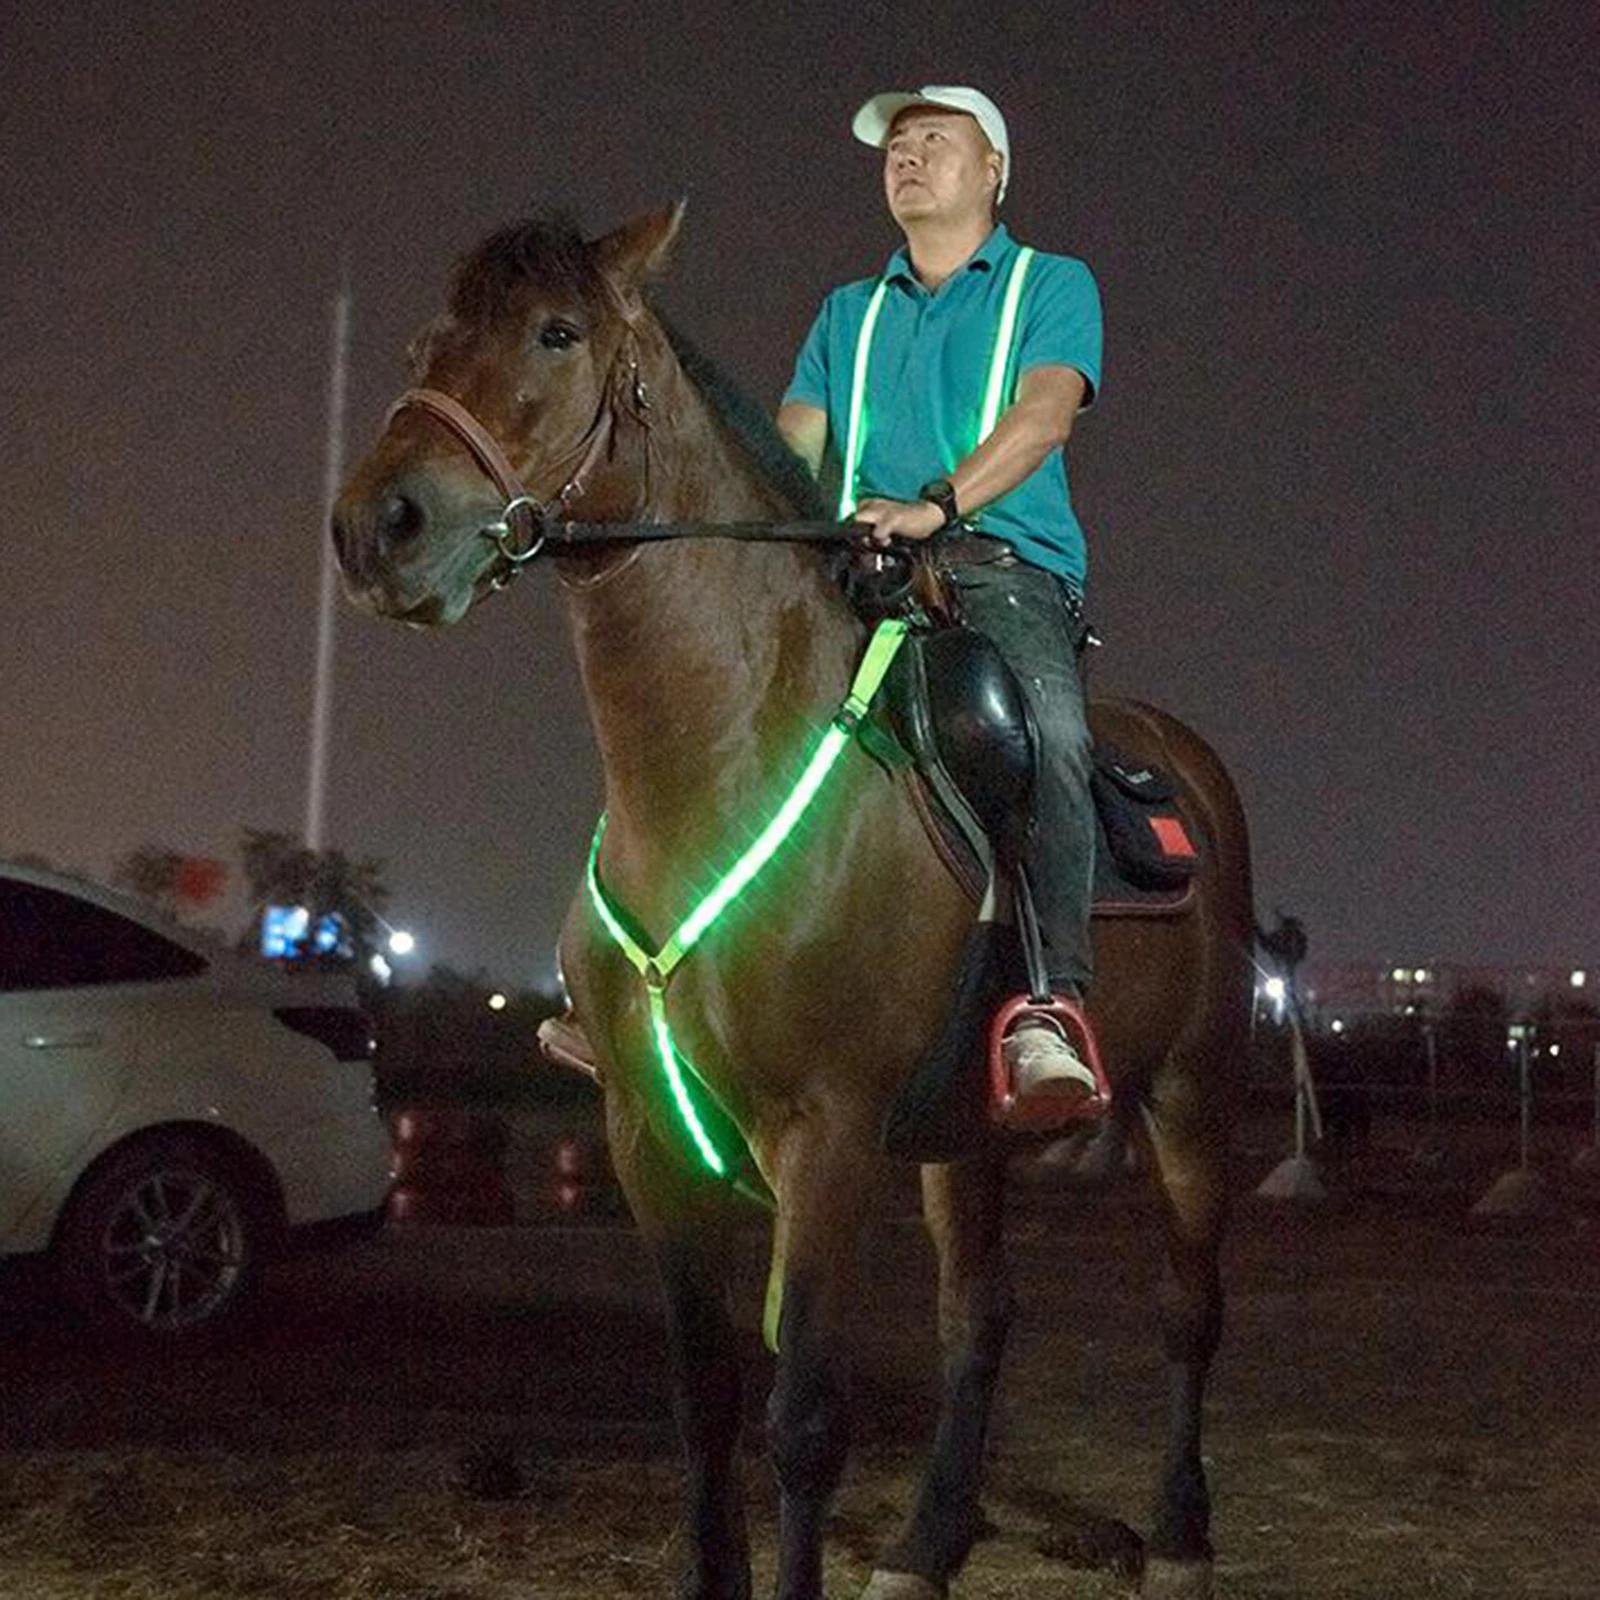 LED Light Horse Breastplate Collar Adjustable Visibility Tack Equestrian Safety Gear for Night Horse Back Riding Horse Show